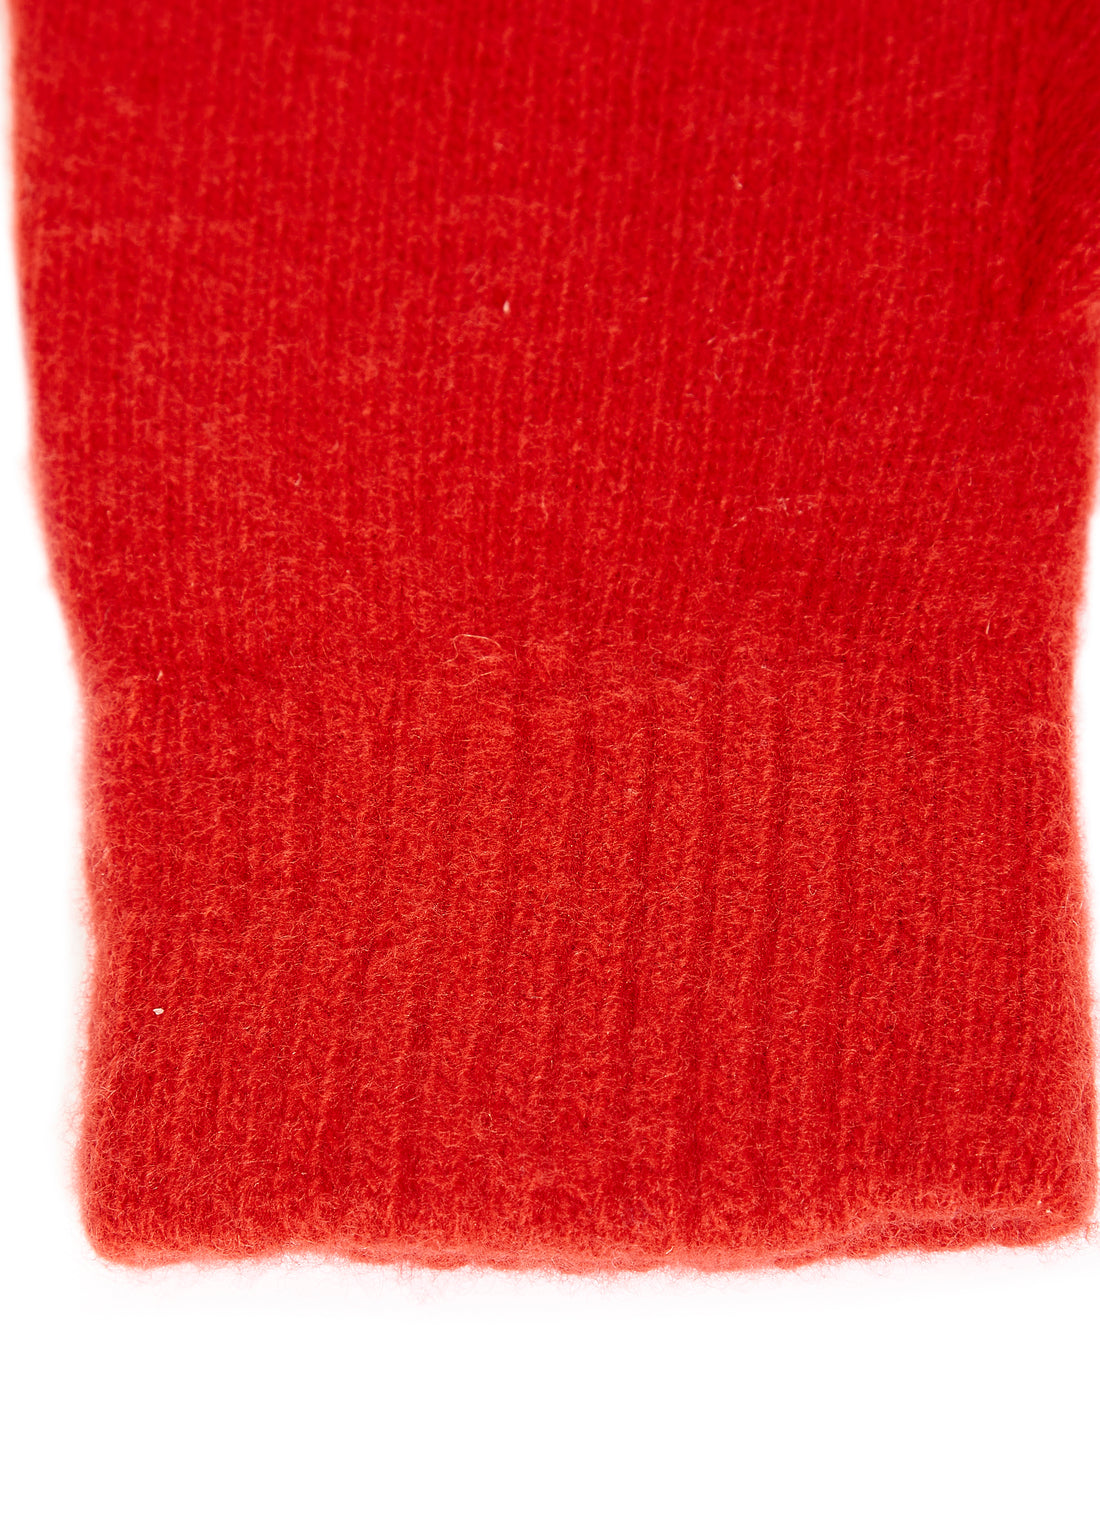 Red Mens Wool and Cashmere Mix Gloves - Jessimara